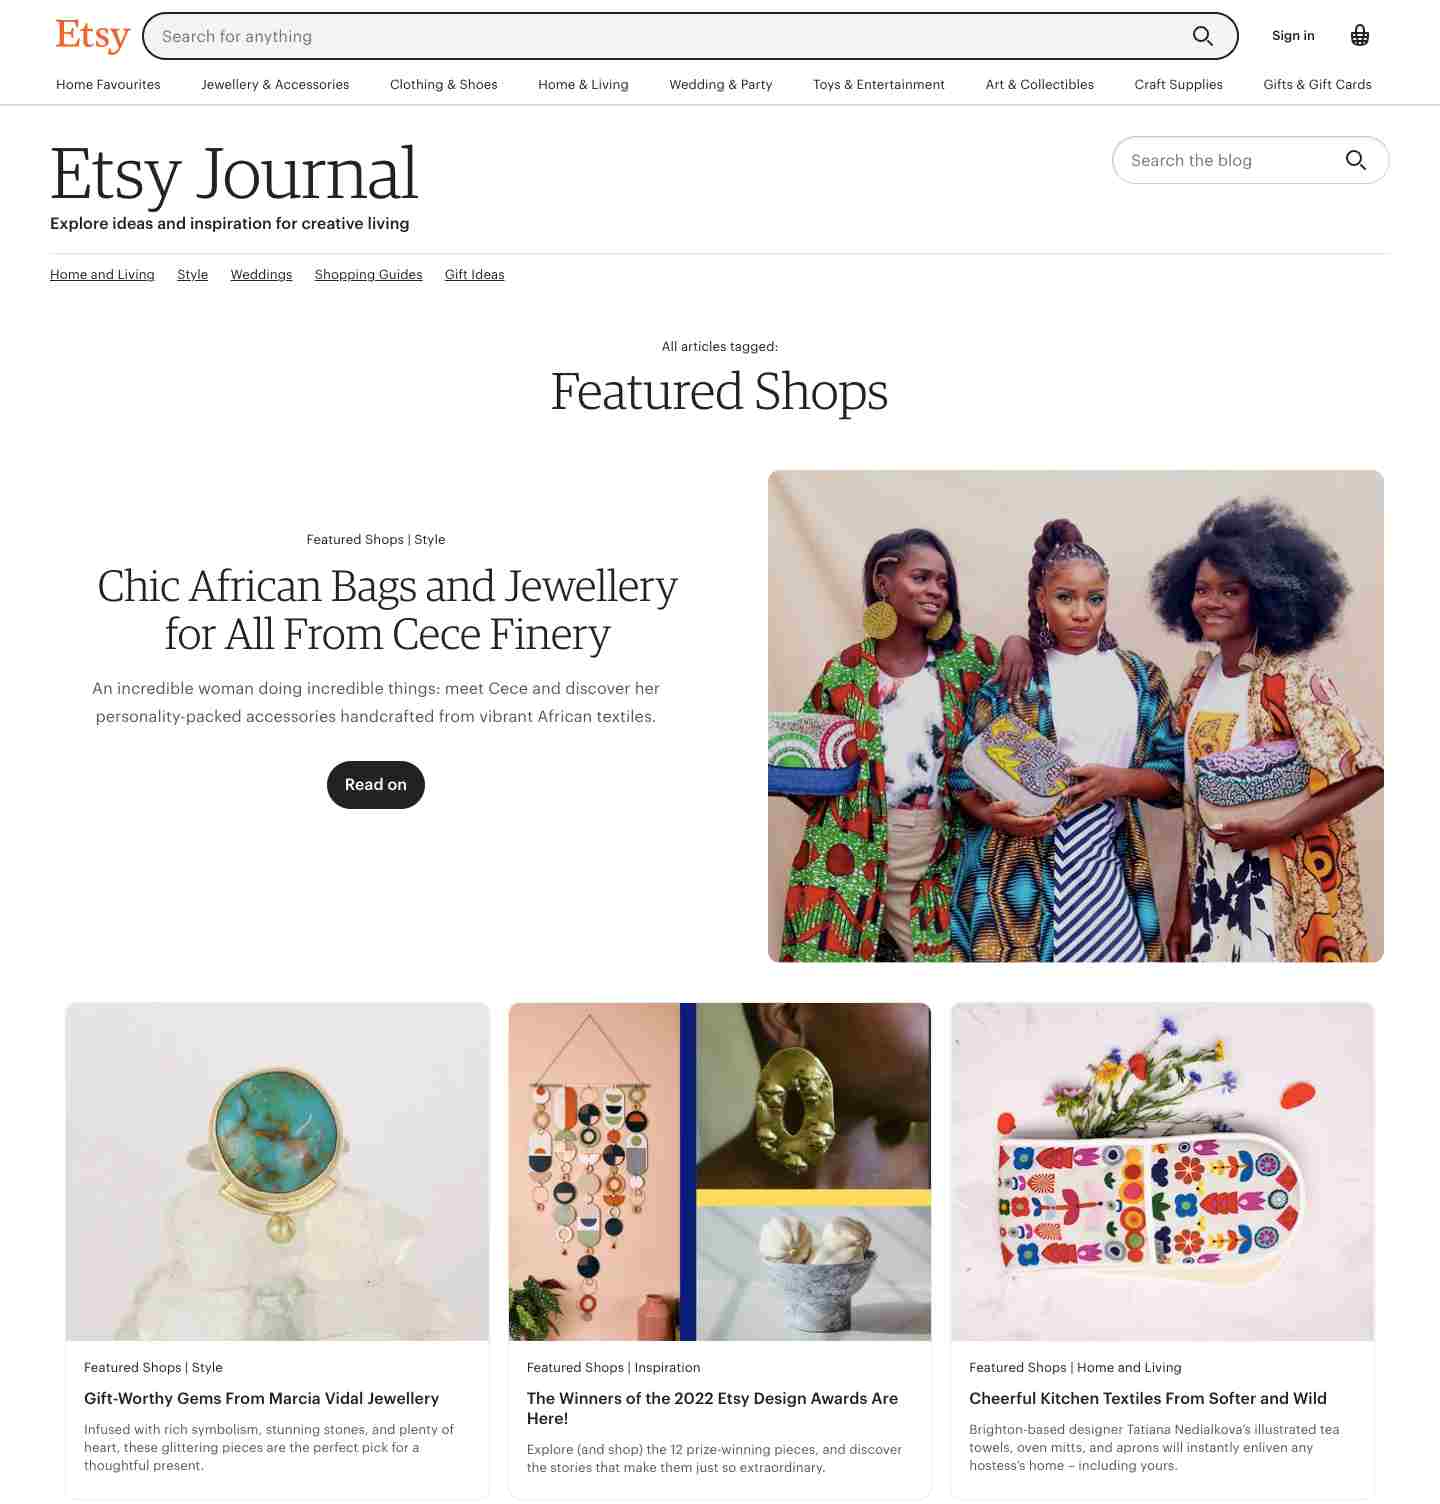 Etsy content marketing strategy: Etsy Featured Shops